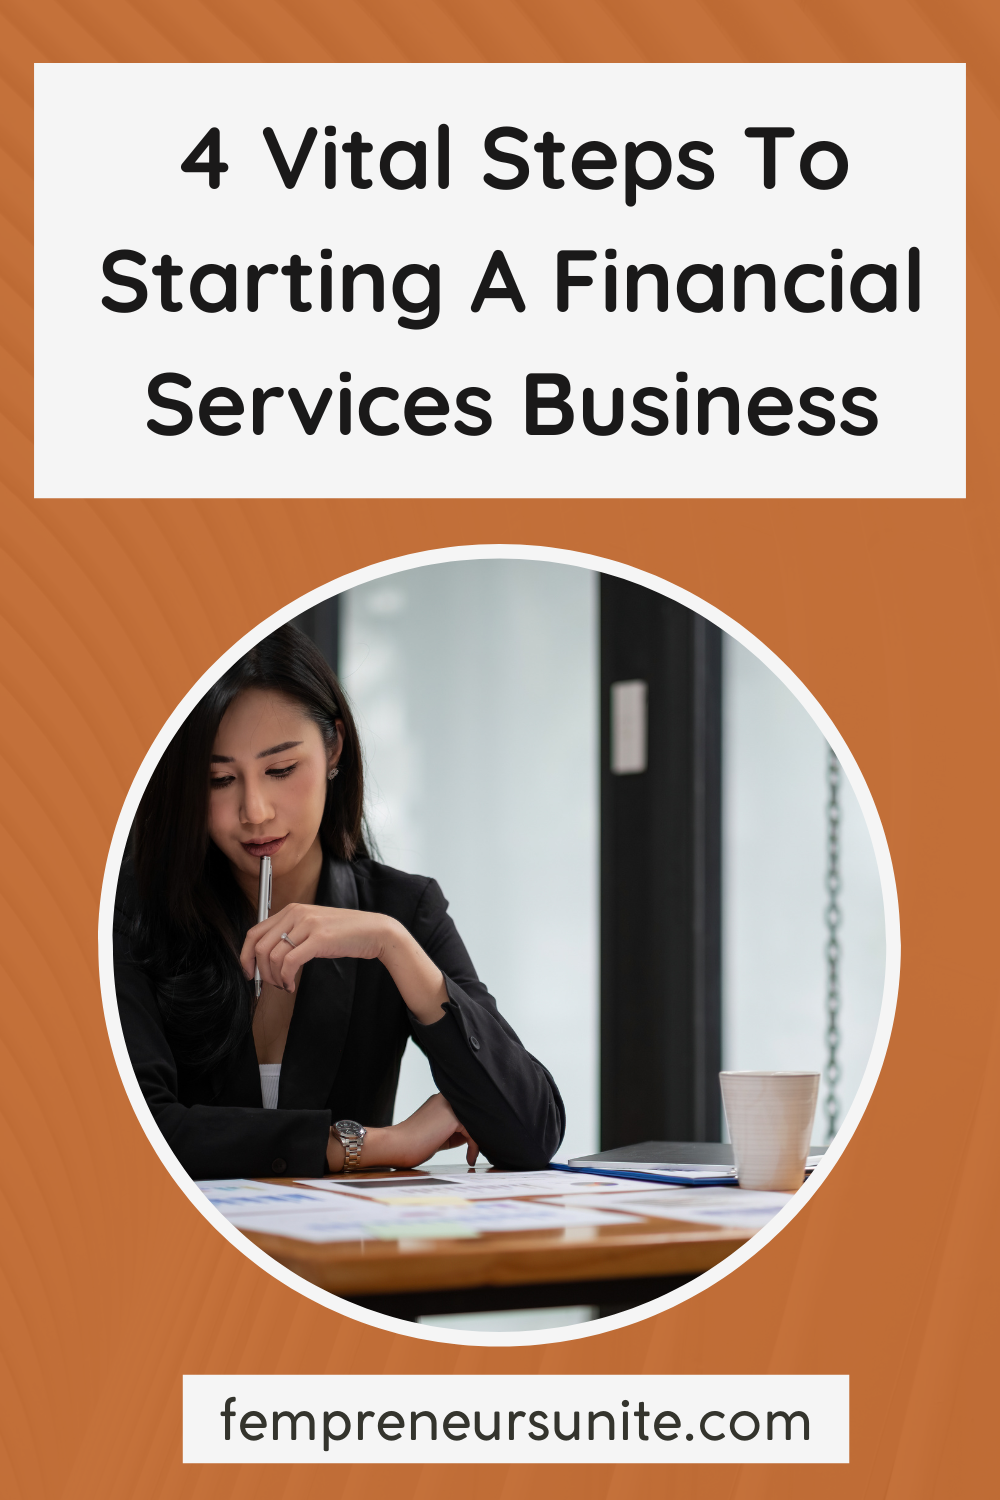 Starting a financial services business can be a lucrative prospect, but it’s not exactly an easy process. Take these 4 vital steps first to achieve success.